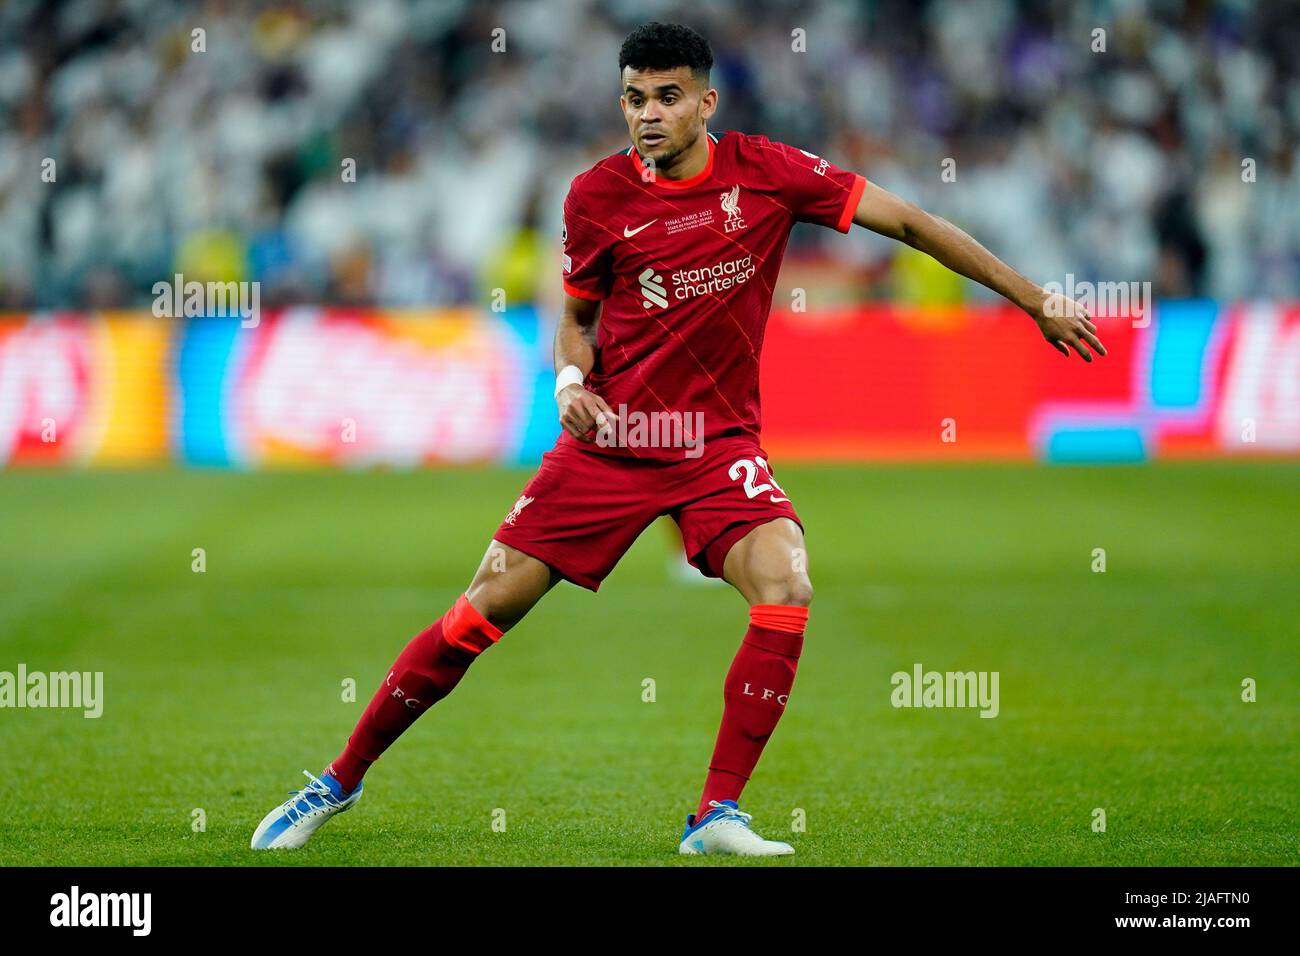 Luis Diaz of Liverpool FC during the UEFA Champions League Final match between Liverpool FC and Real Madrid played at Stade de France on May 28, 2022 in Paris, France. (Photo / Magma) Stock Photo